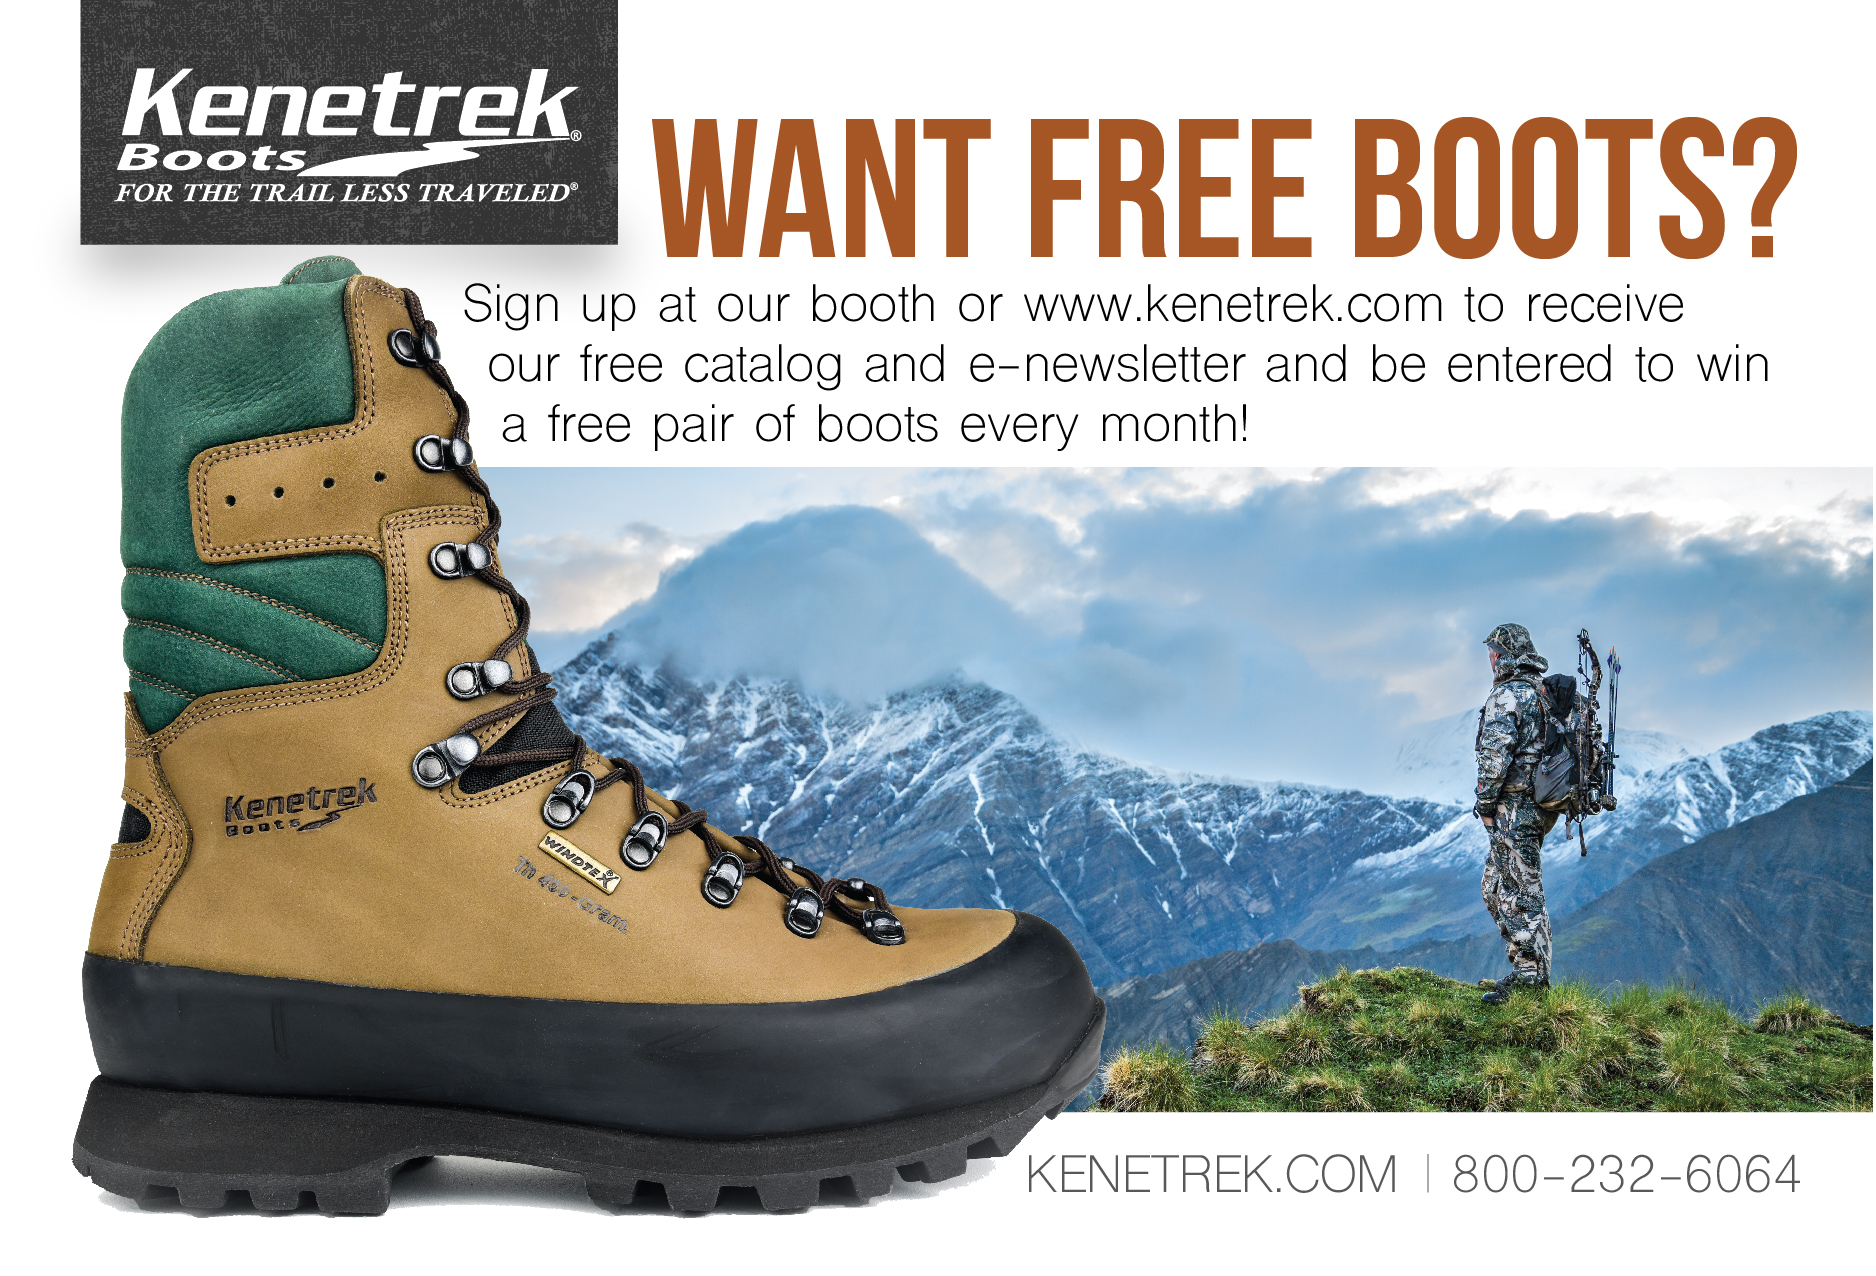 Want free boots?